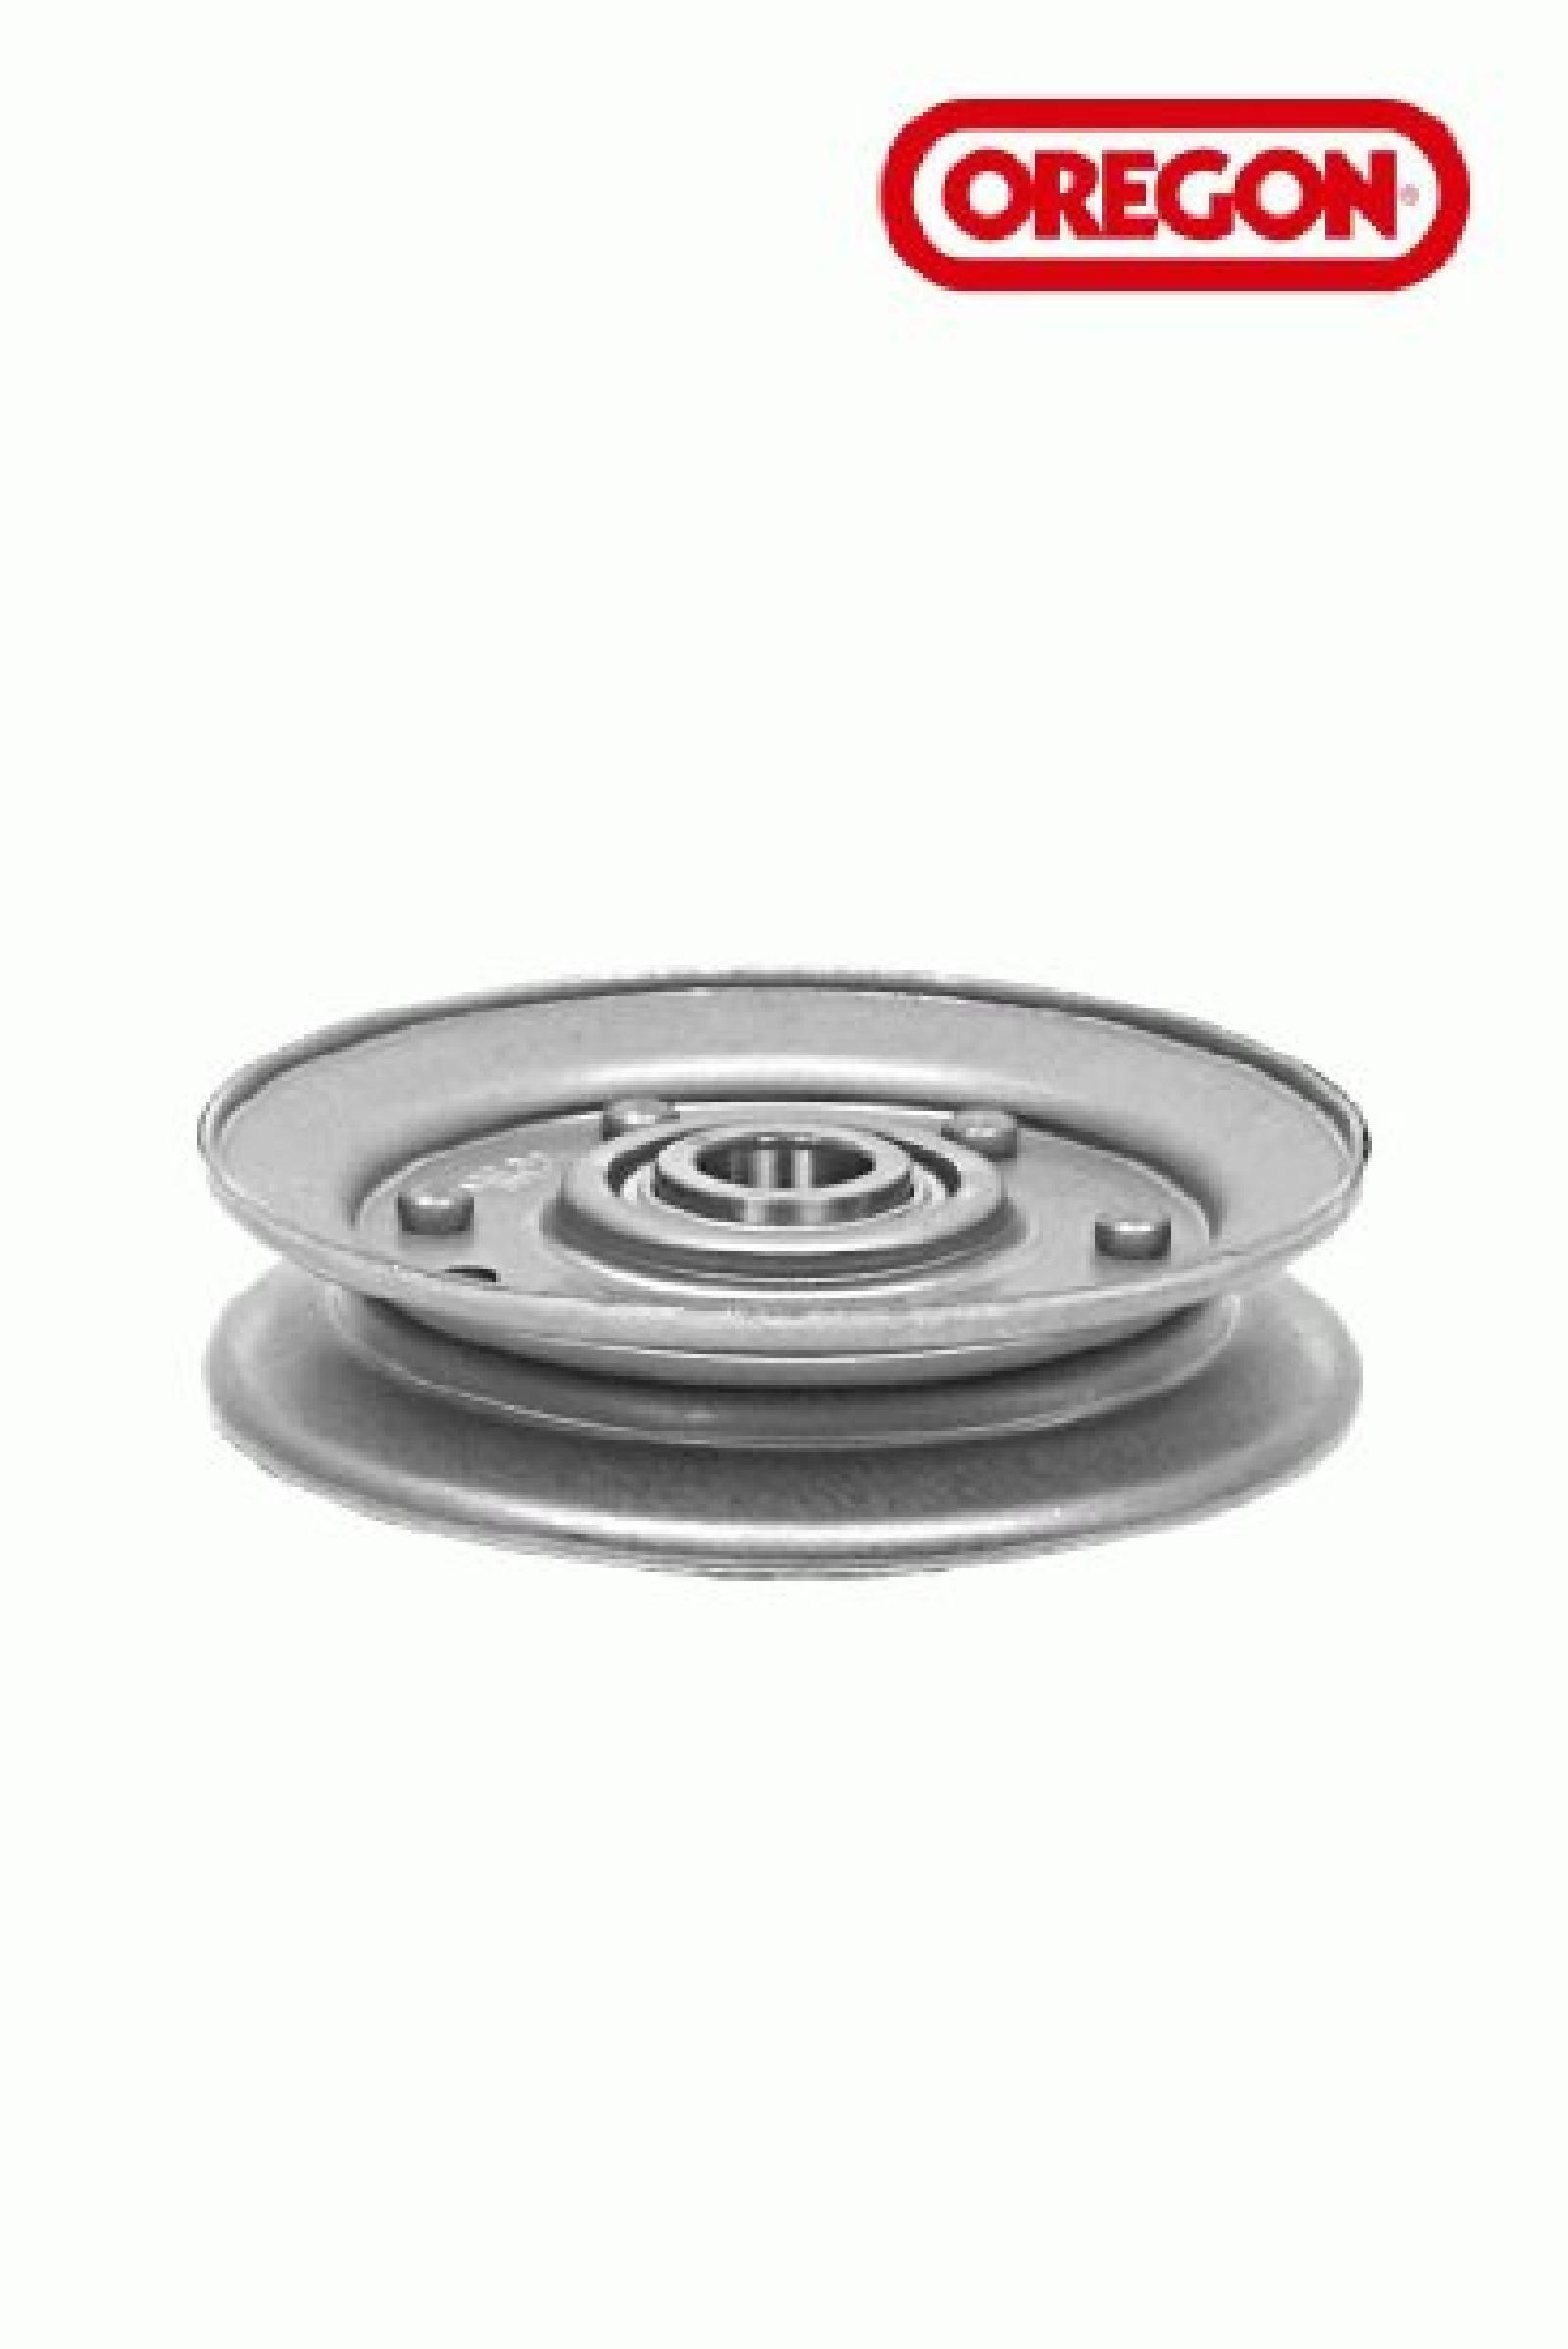 PULLEY, V IDLER DIXIE CHO part# 78-010 by Oregon - Click Image to Close